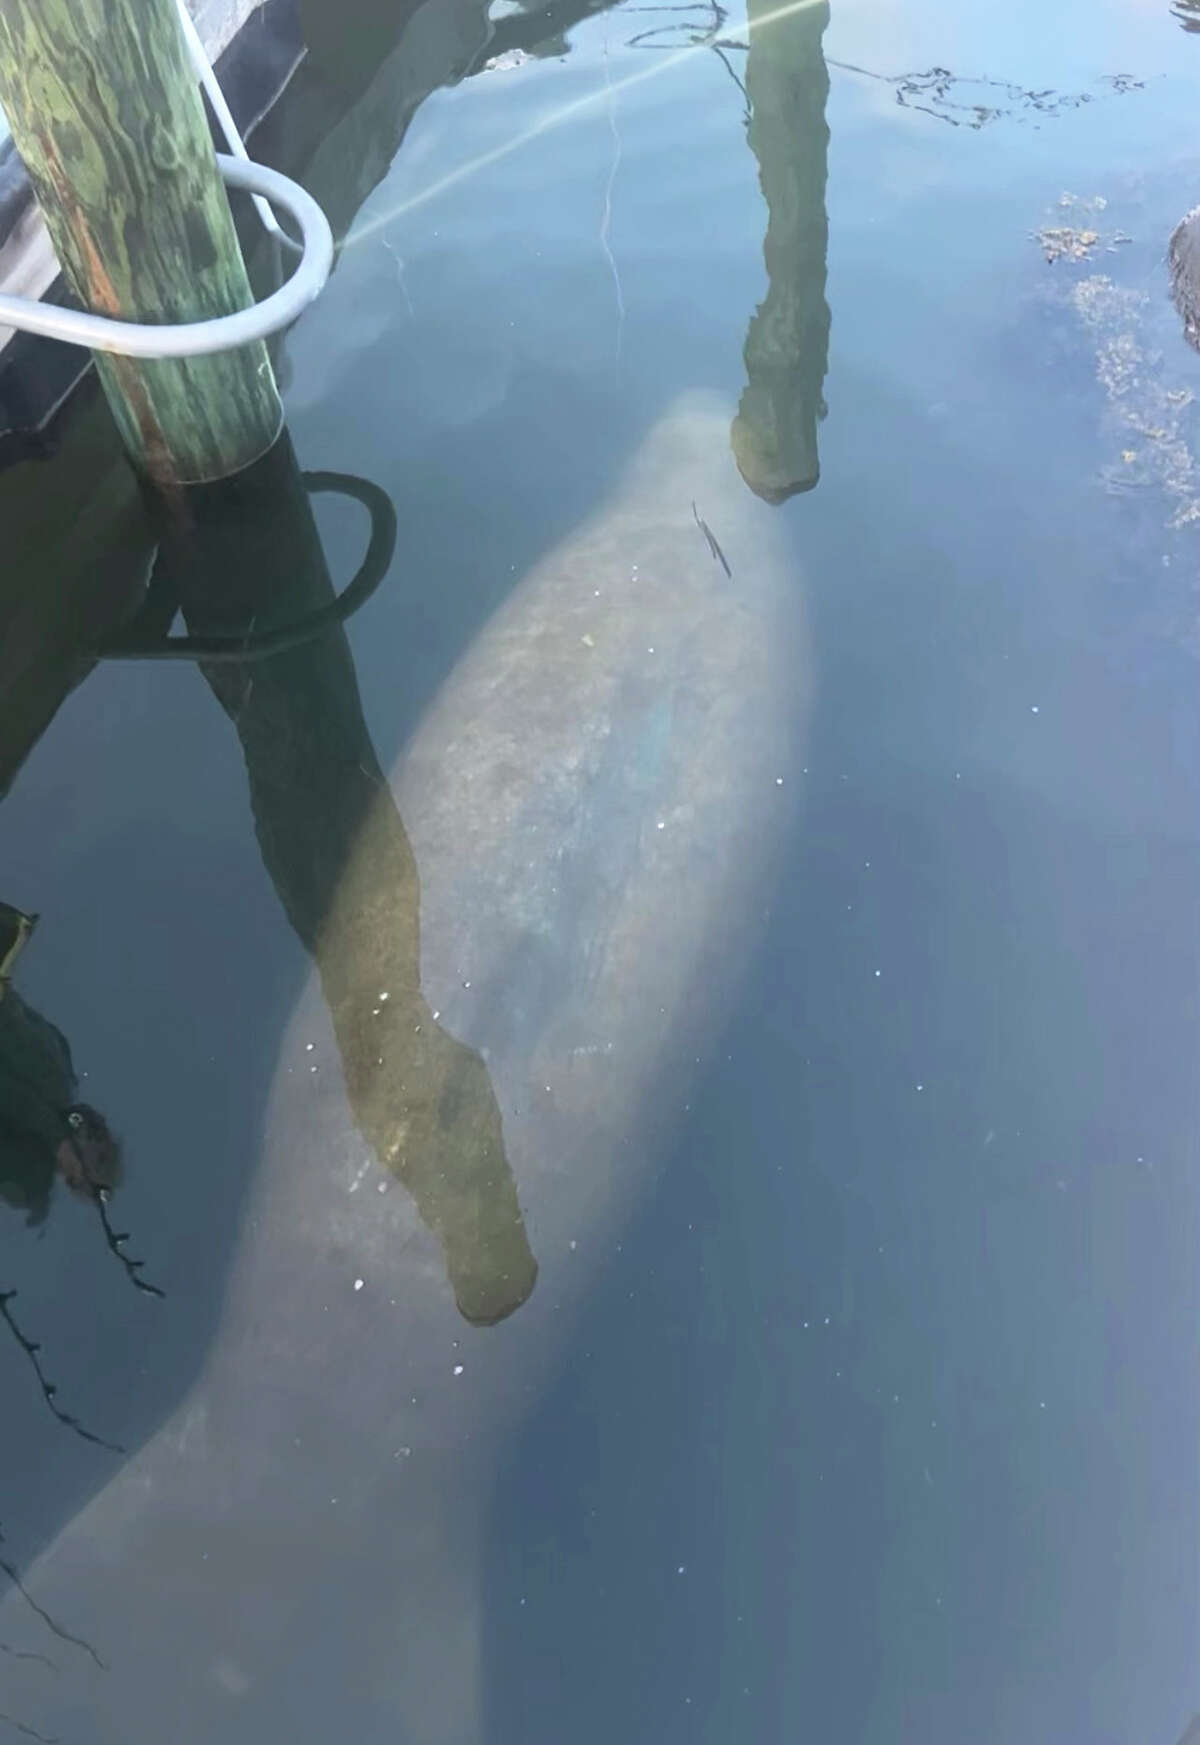 A Rhode Island manatee. The sea mammal native to Florida and the Gulf Coast was spotted recently in a coastal lagoon near the state border with Connecticut.